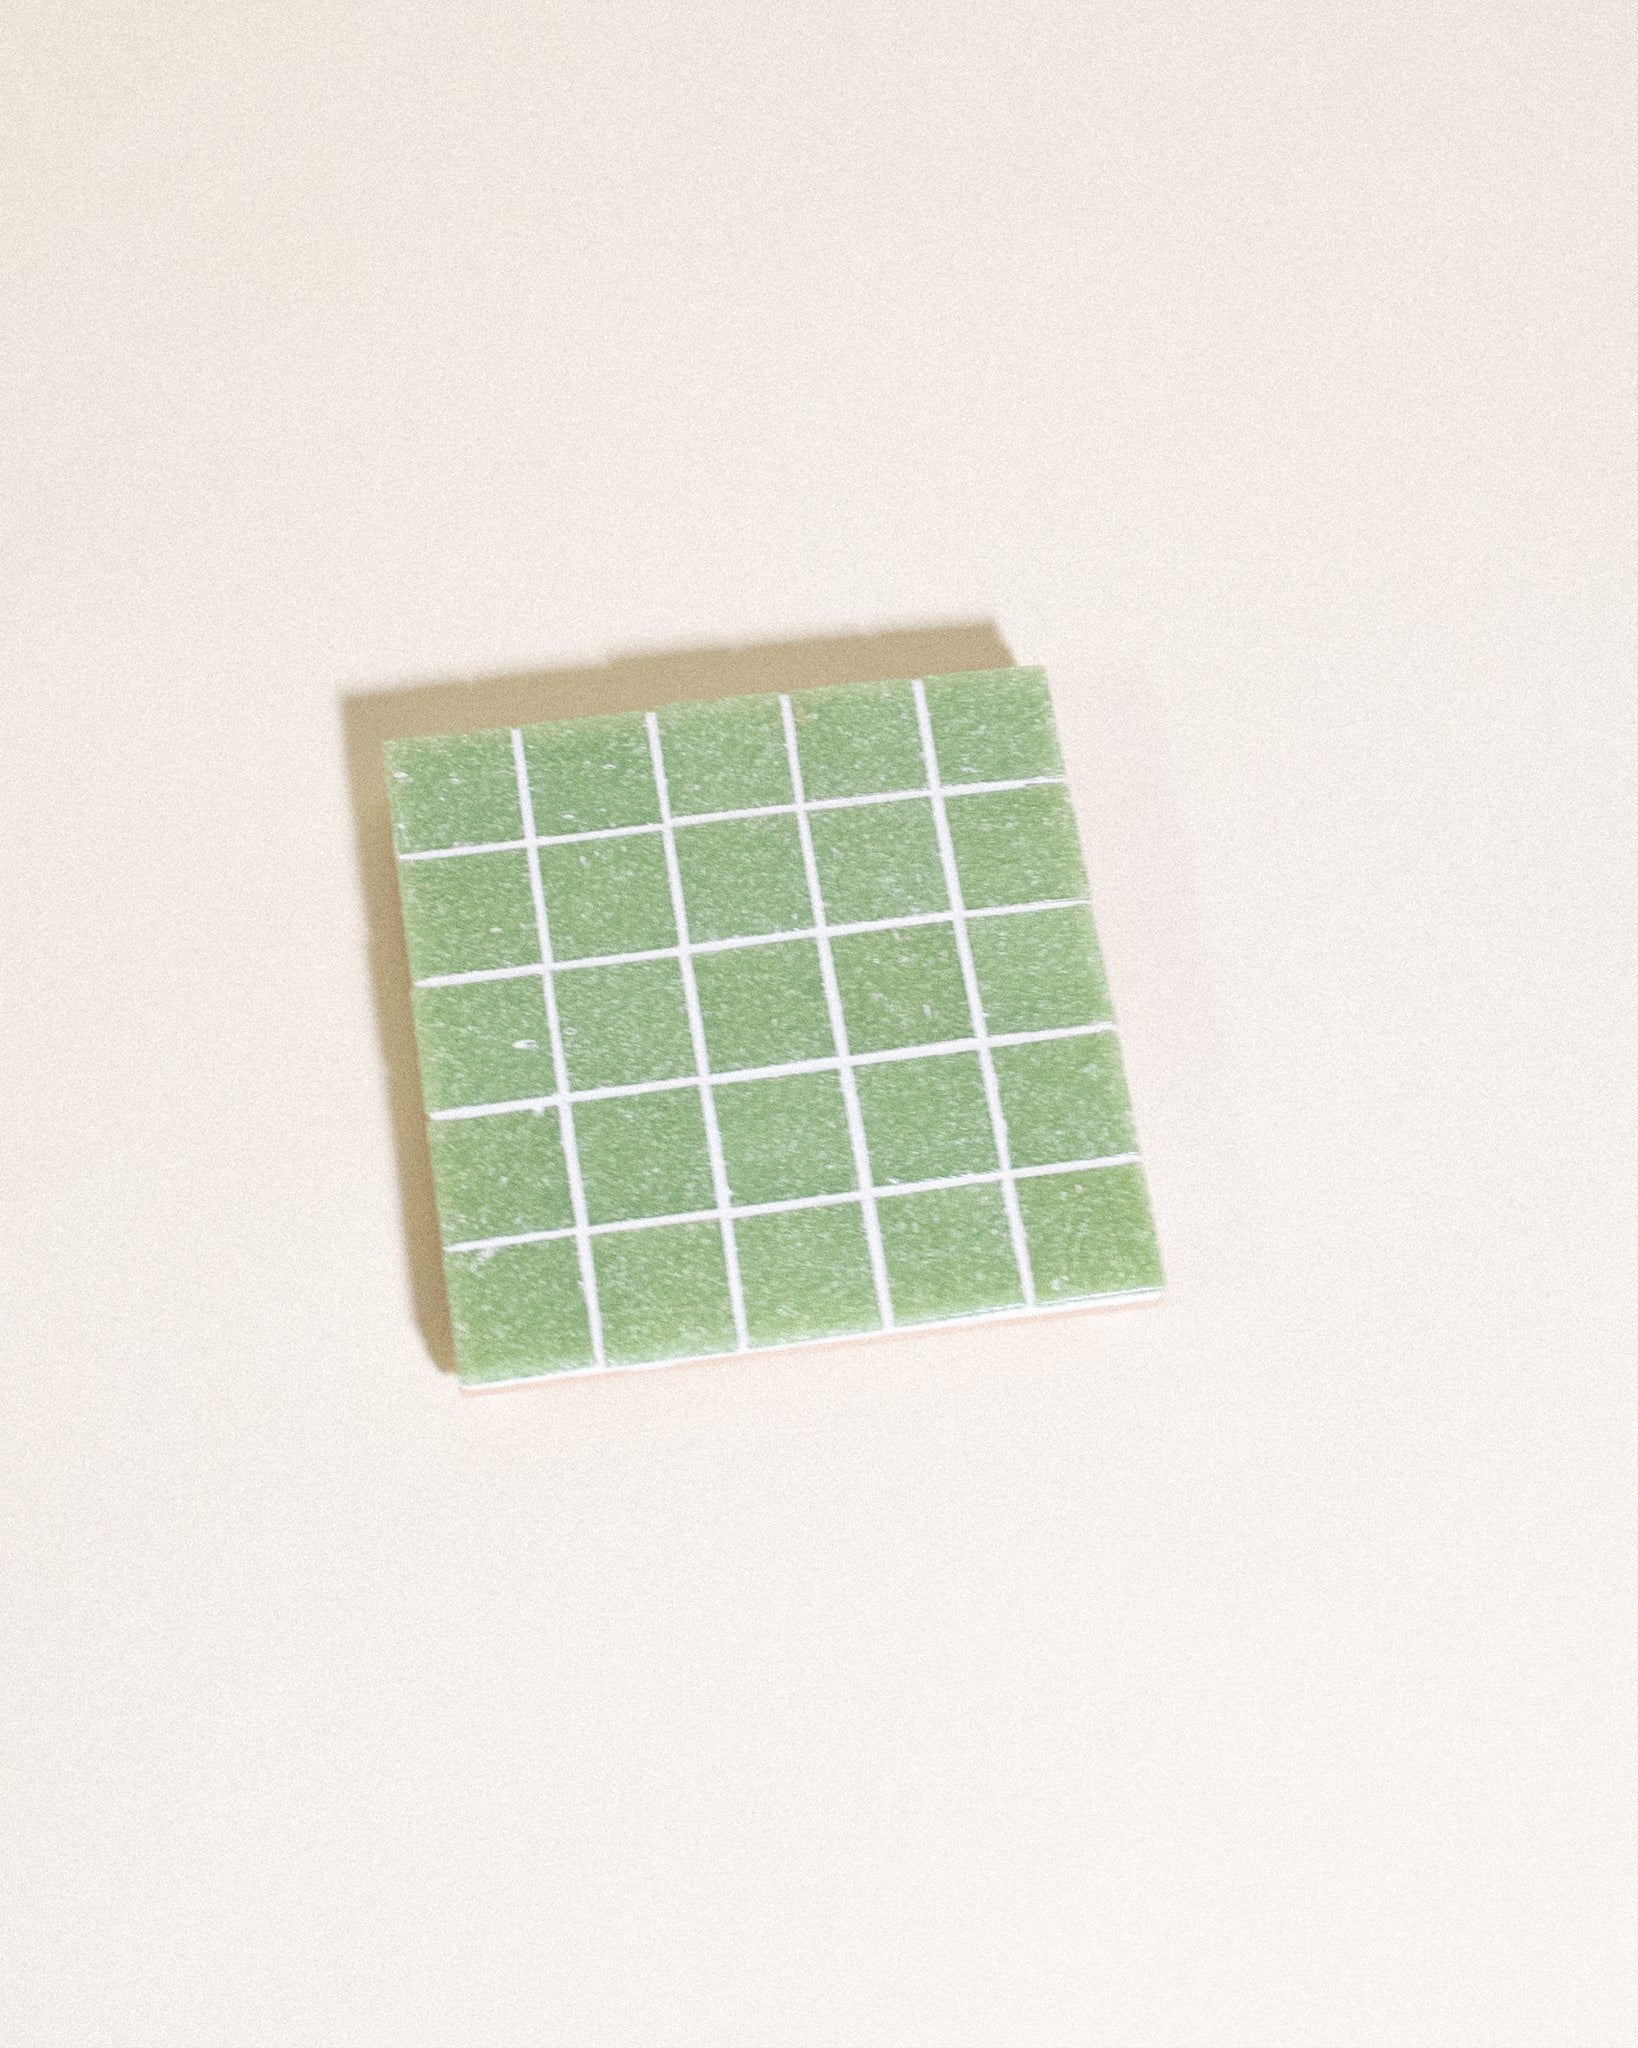 GLASS TILE COASTER - Sour Patch Candy - 04